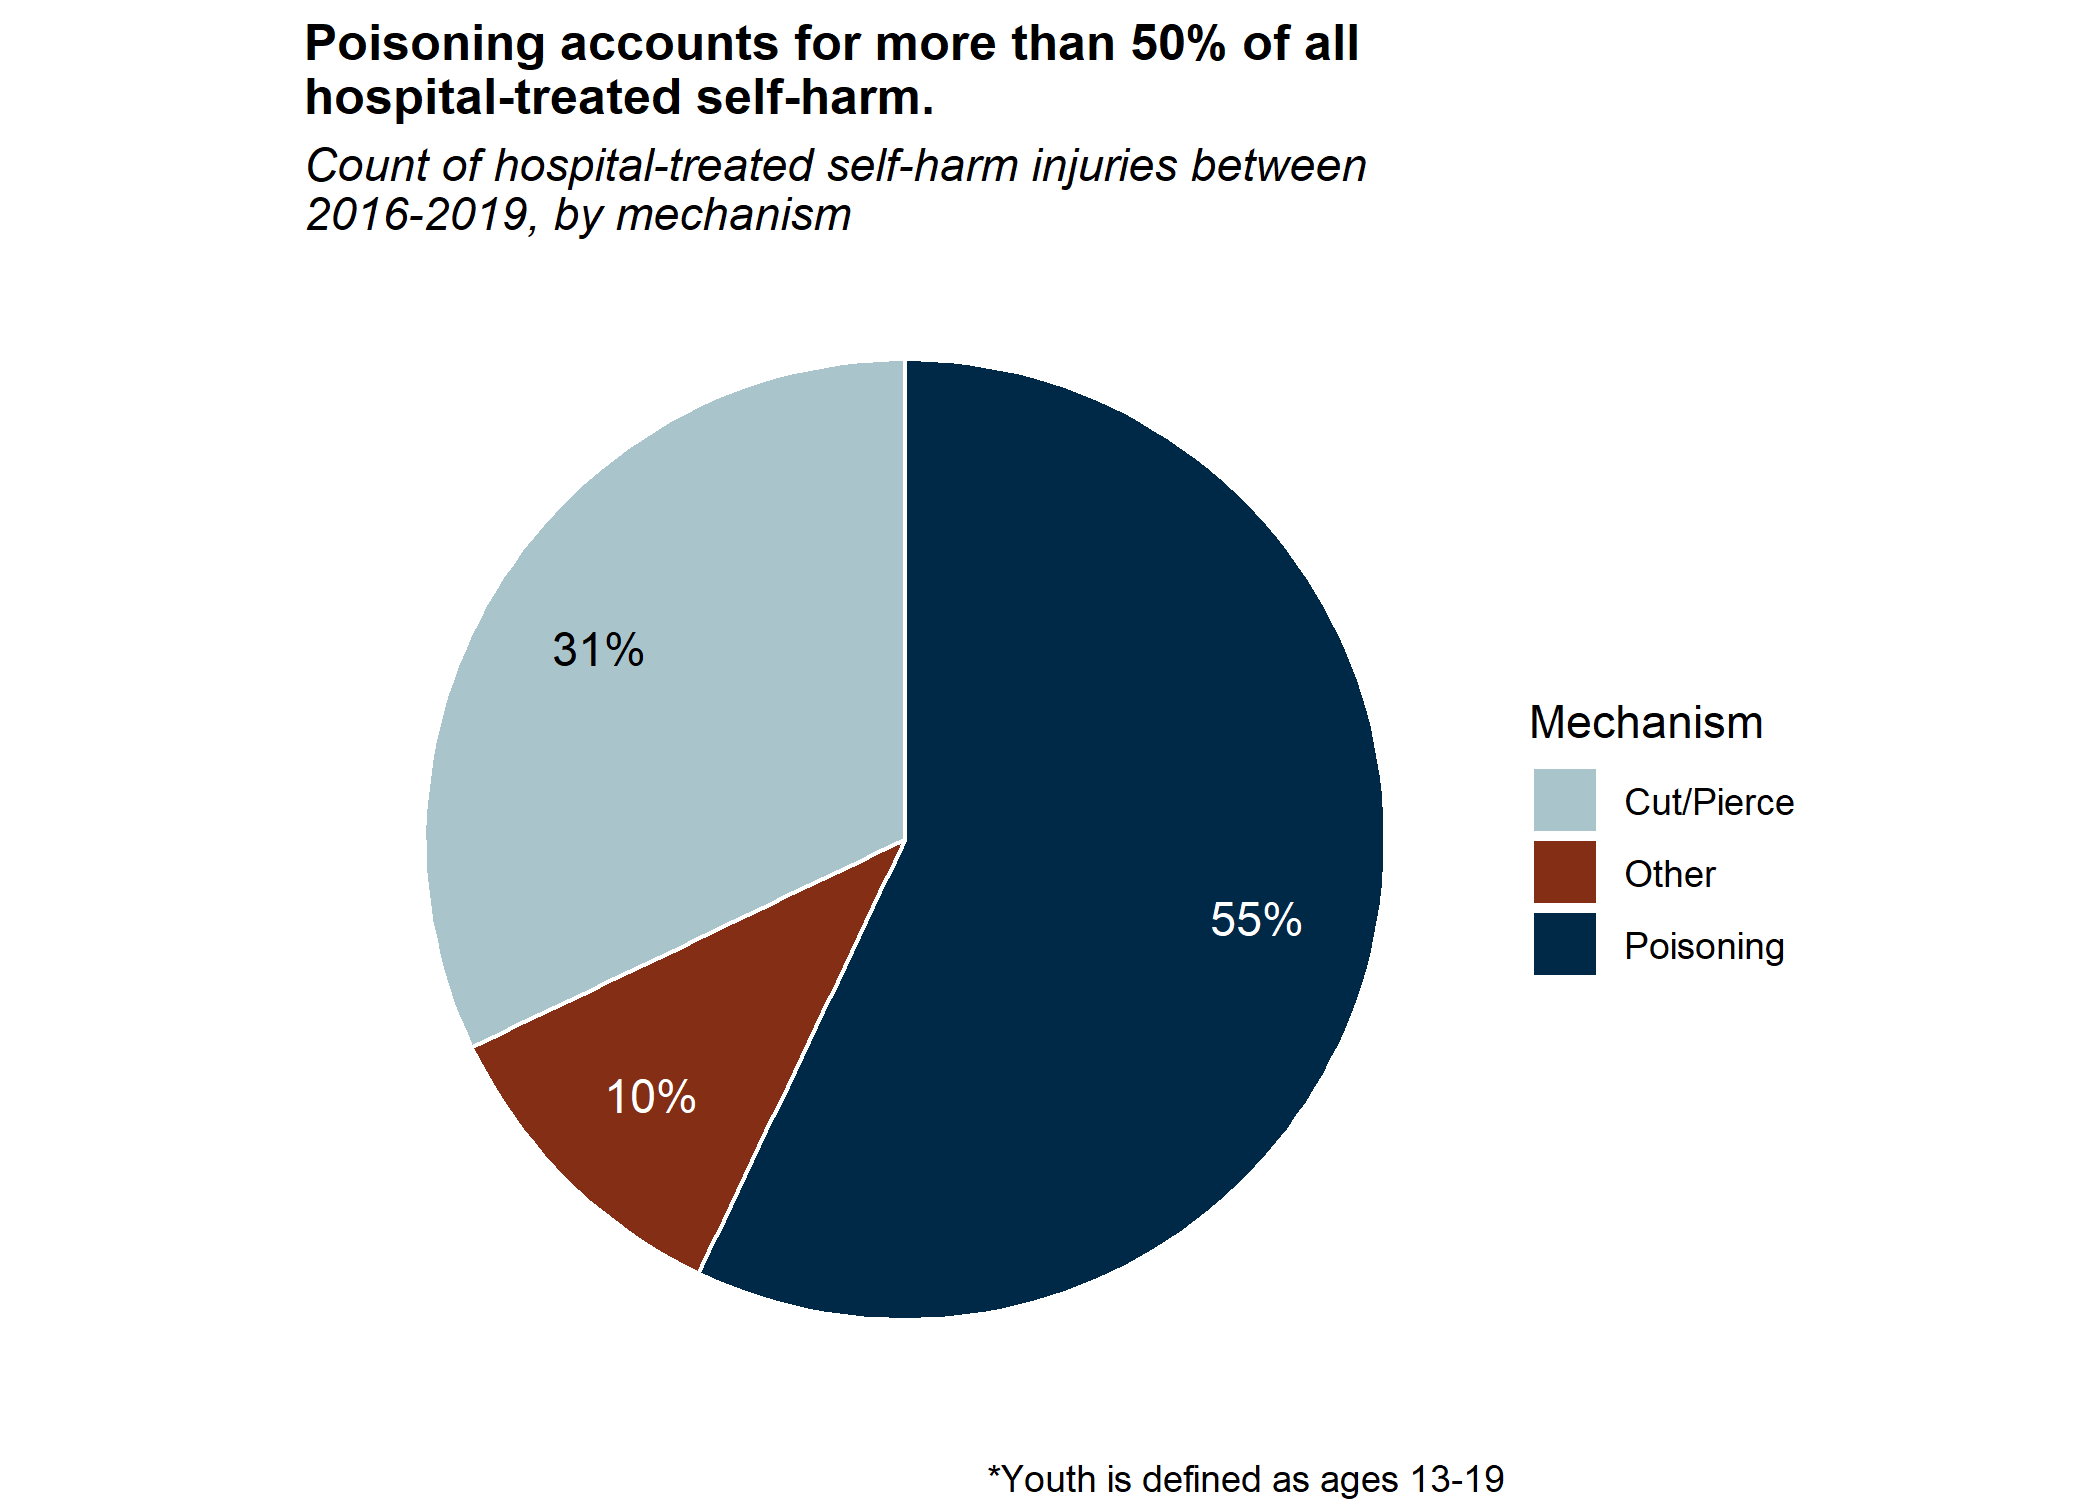 Count of hospital-treated self-harm injuries between 2016-2019, by mechanism. Poisoning accounts for more than 50% of all hospital treated self-harm. 